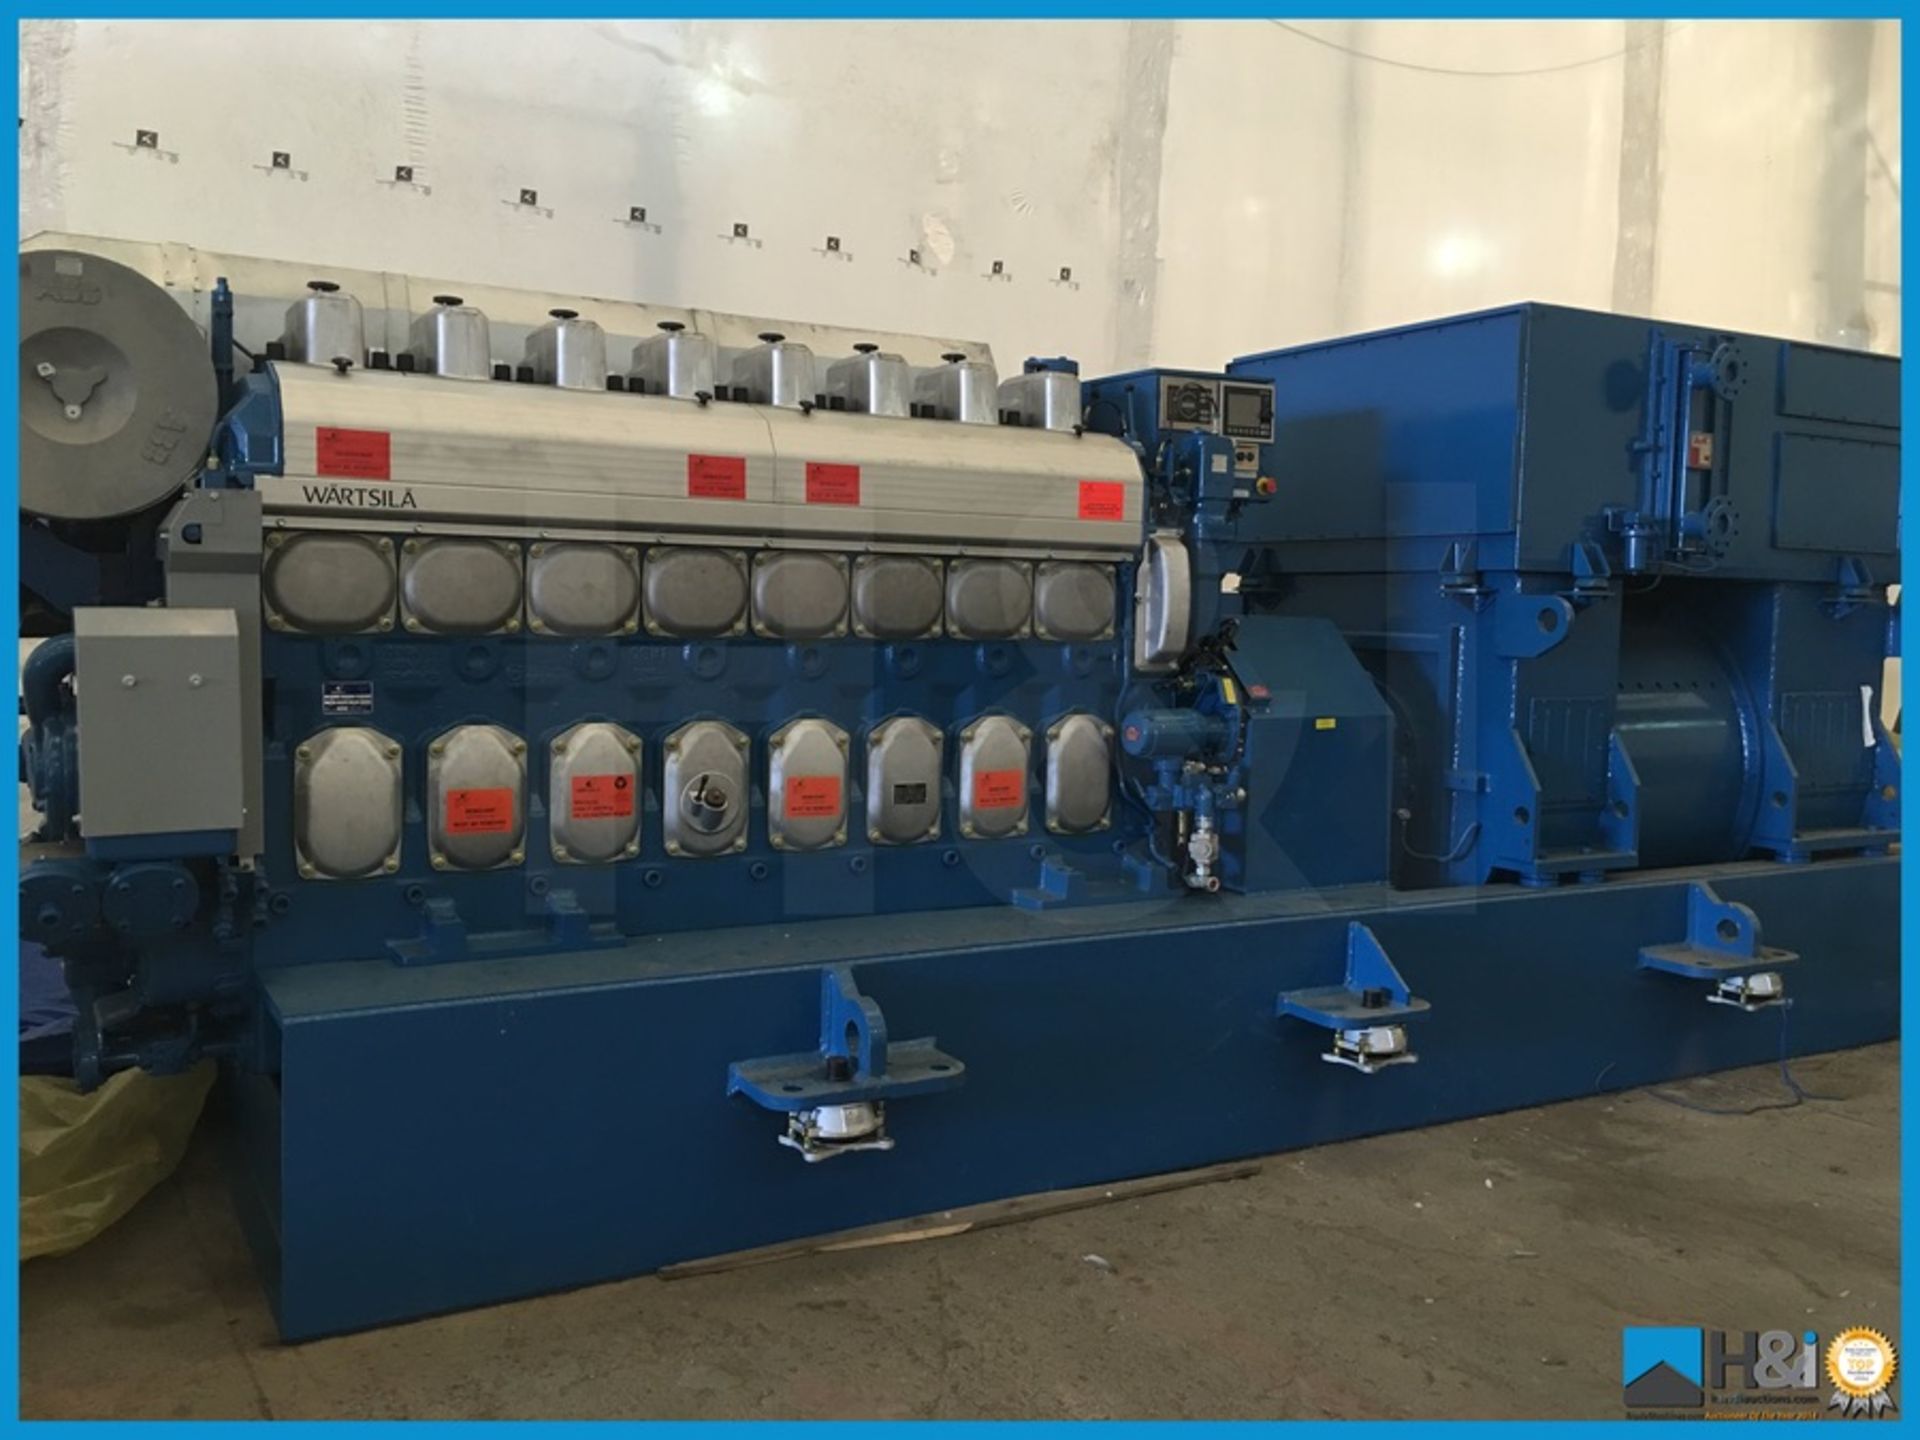 Unused Wartsila 8L20 high capacity diesel generator manufactured in 2013 for a large marine